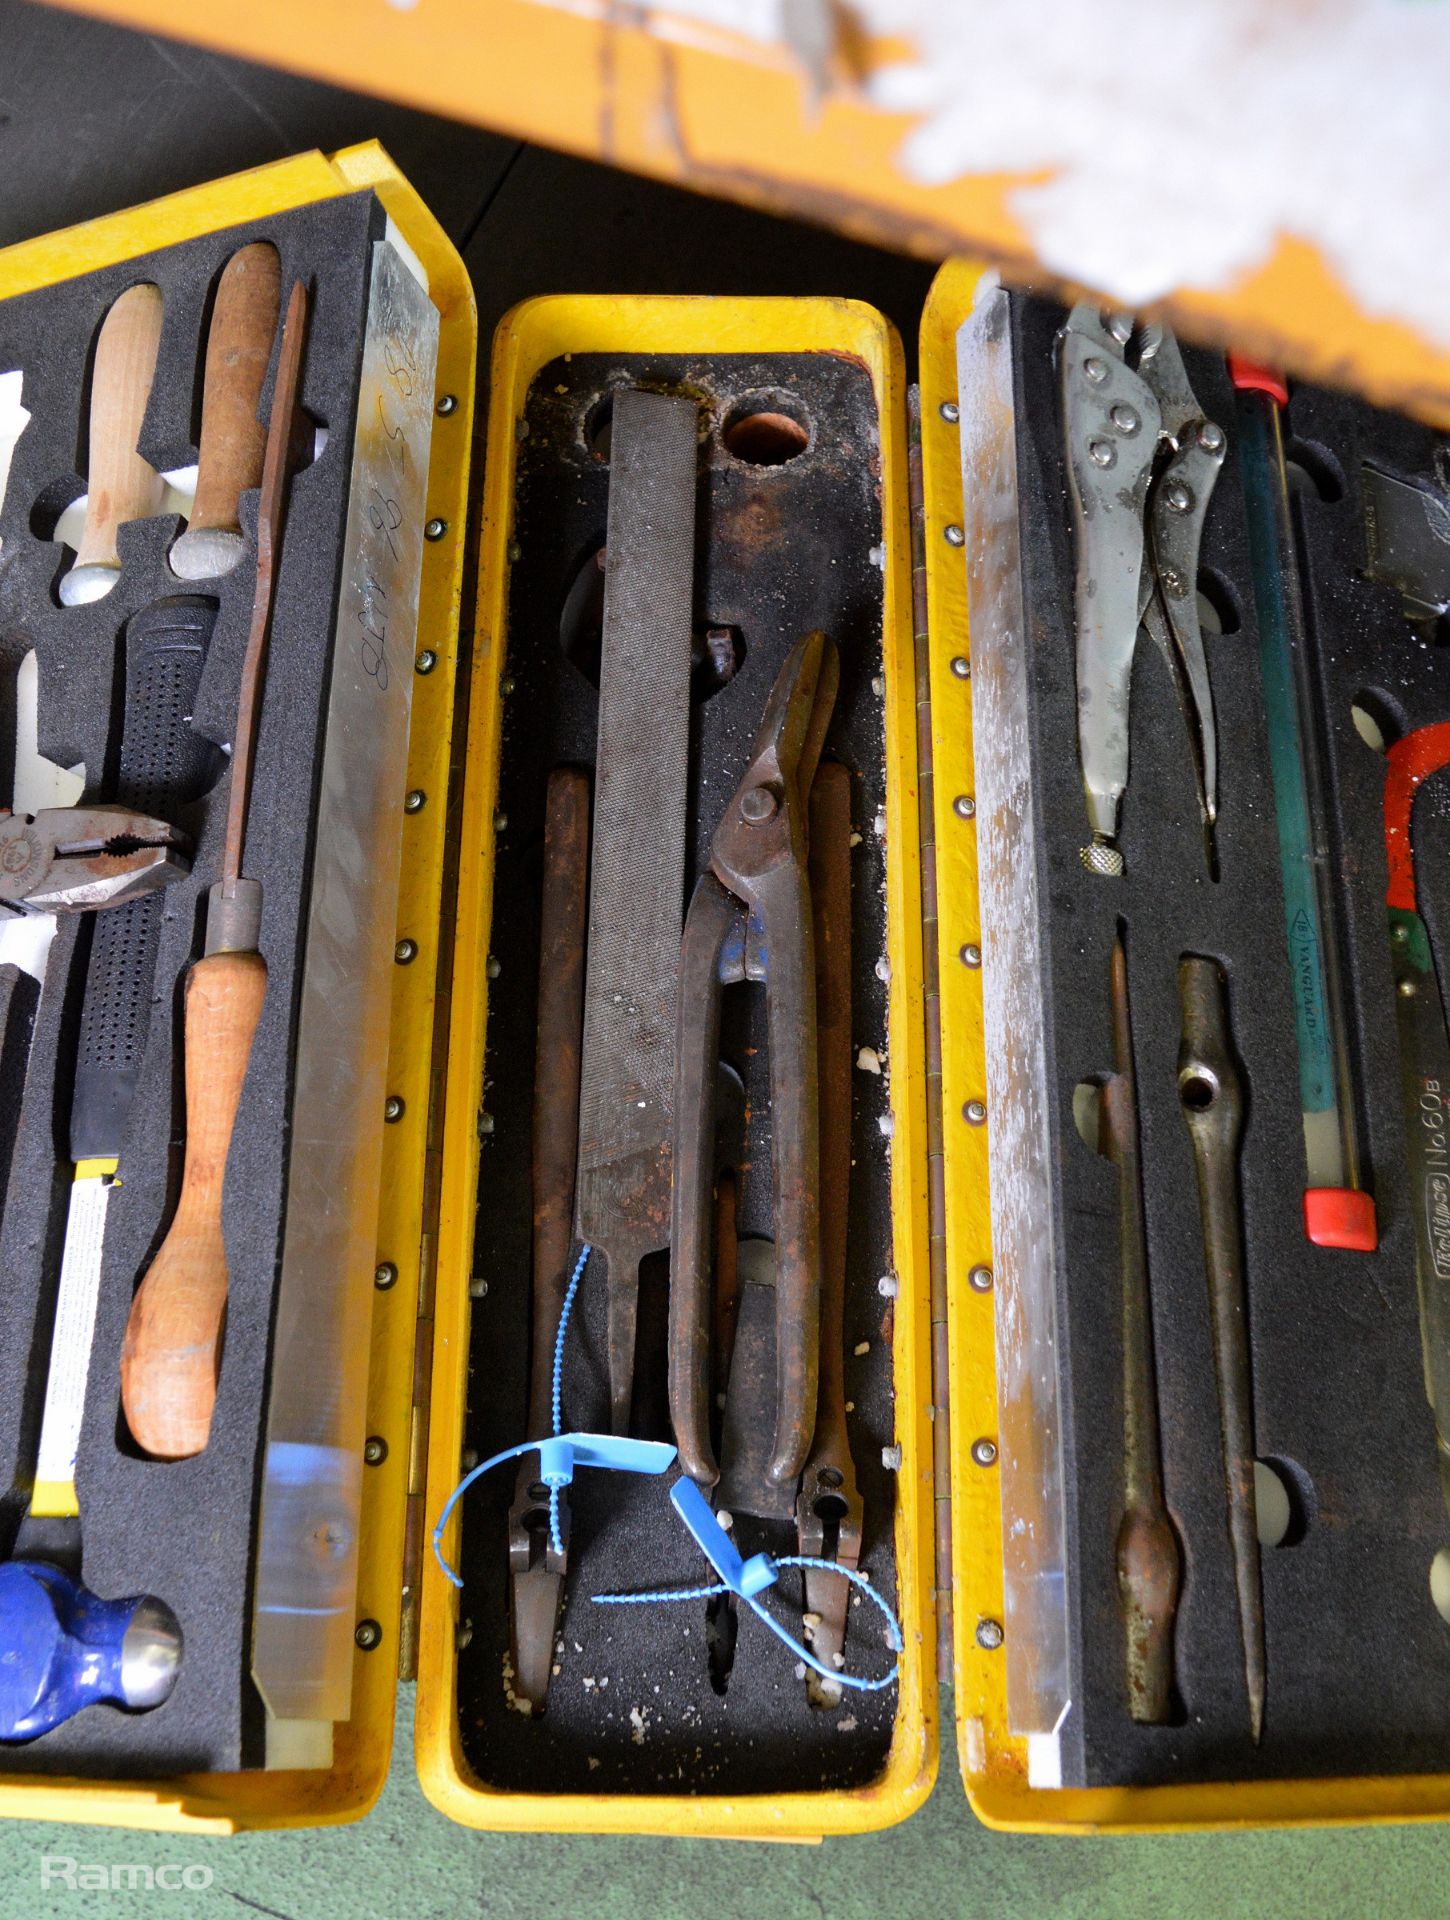 Tool Box With Various Mechanic Tools - Image 3 of 5